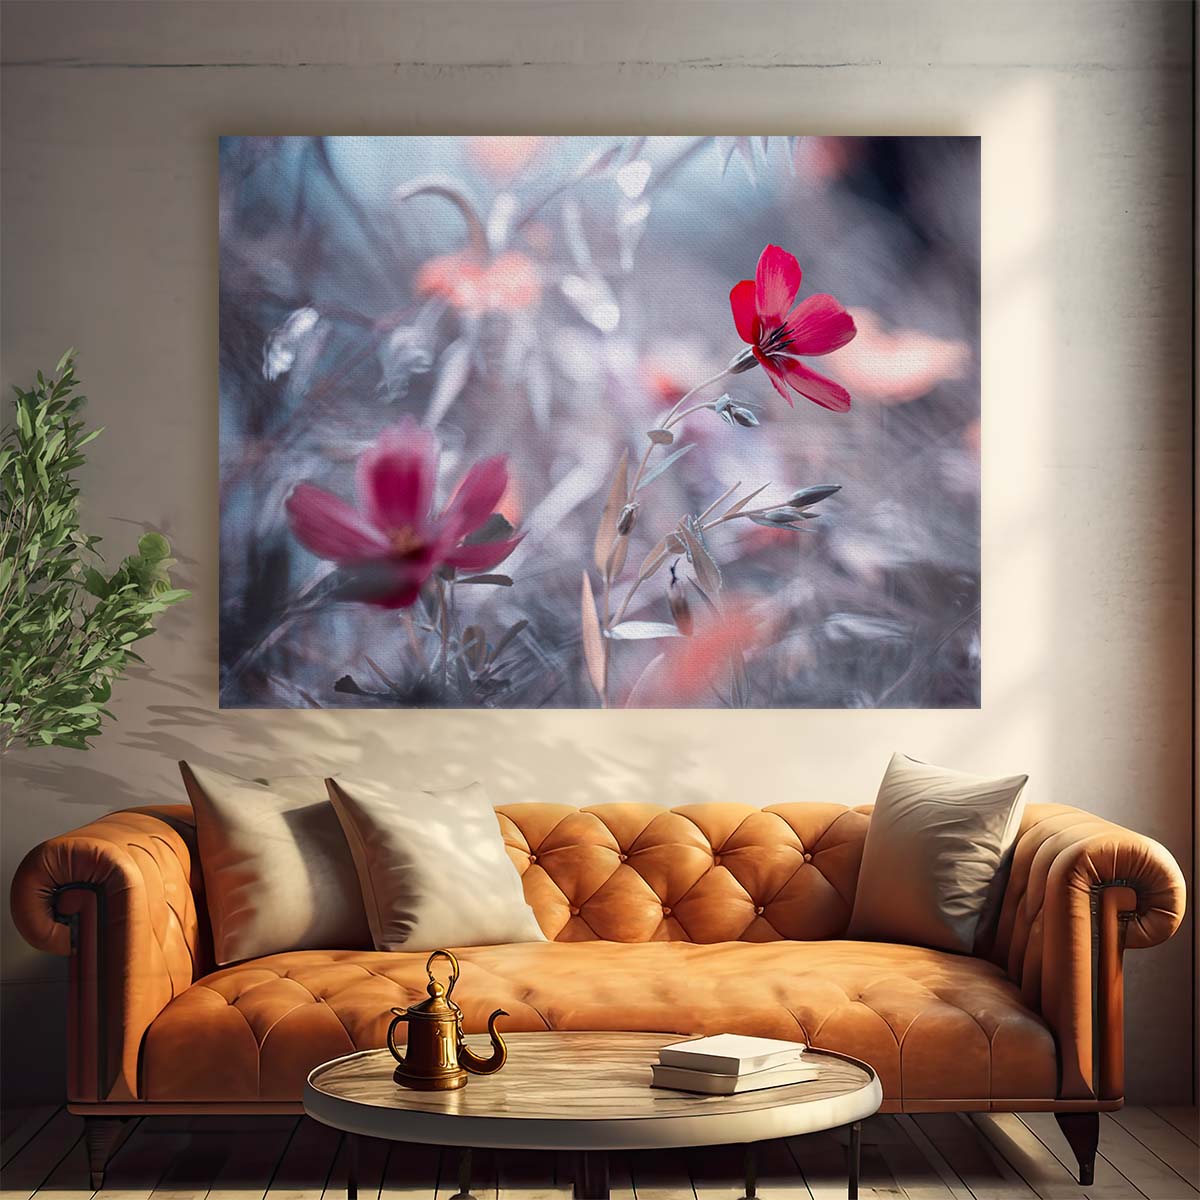 Romantic Red Floral Bokeh Love Macro Wall Art by Luxuriance Designs. Made in USA.